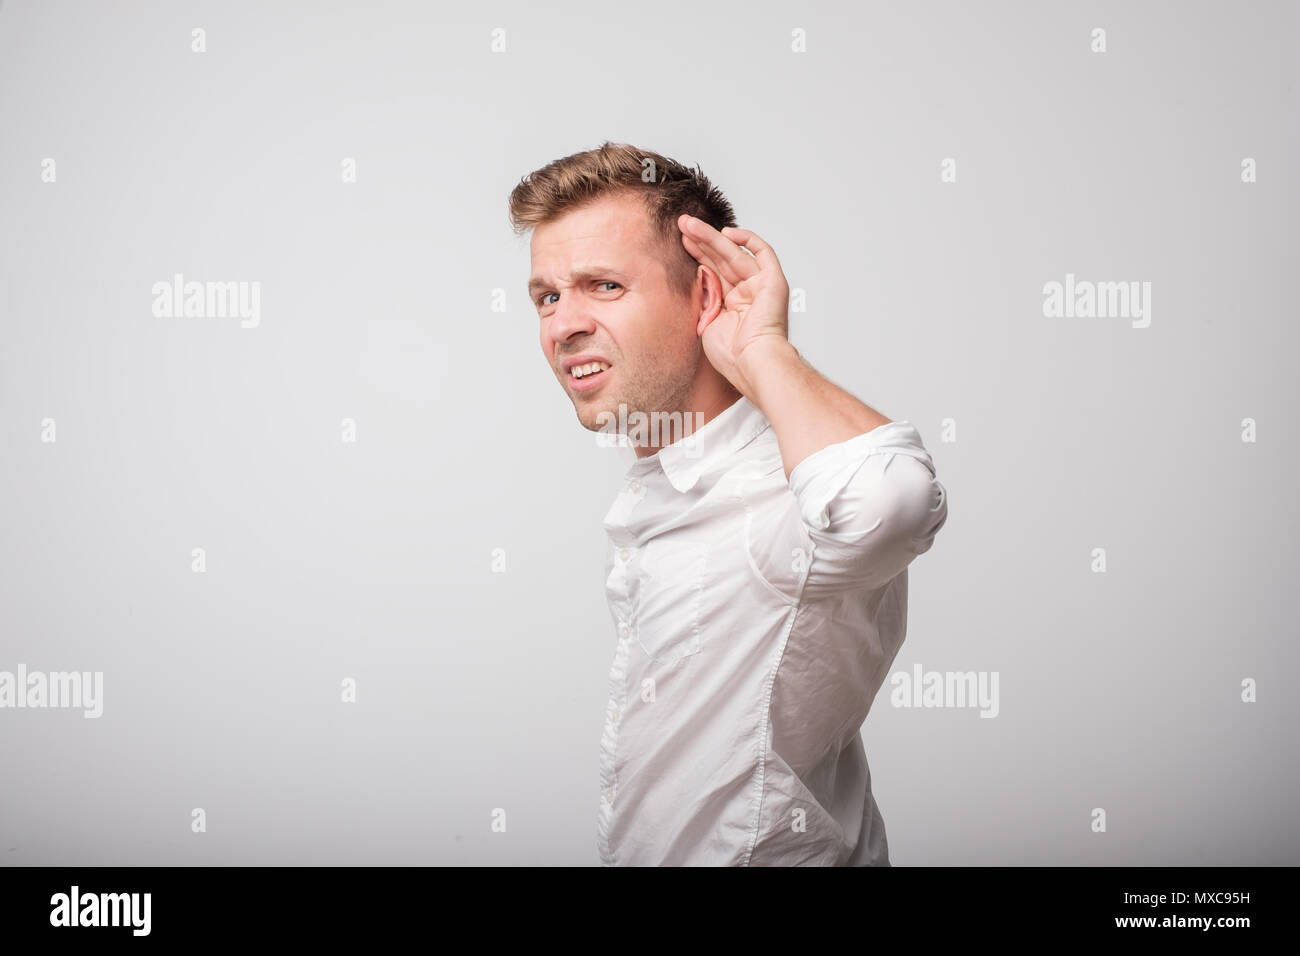 A young man puts a hand on the ear try to hear the whisper, isolated on a white background. Stock Photo